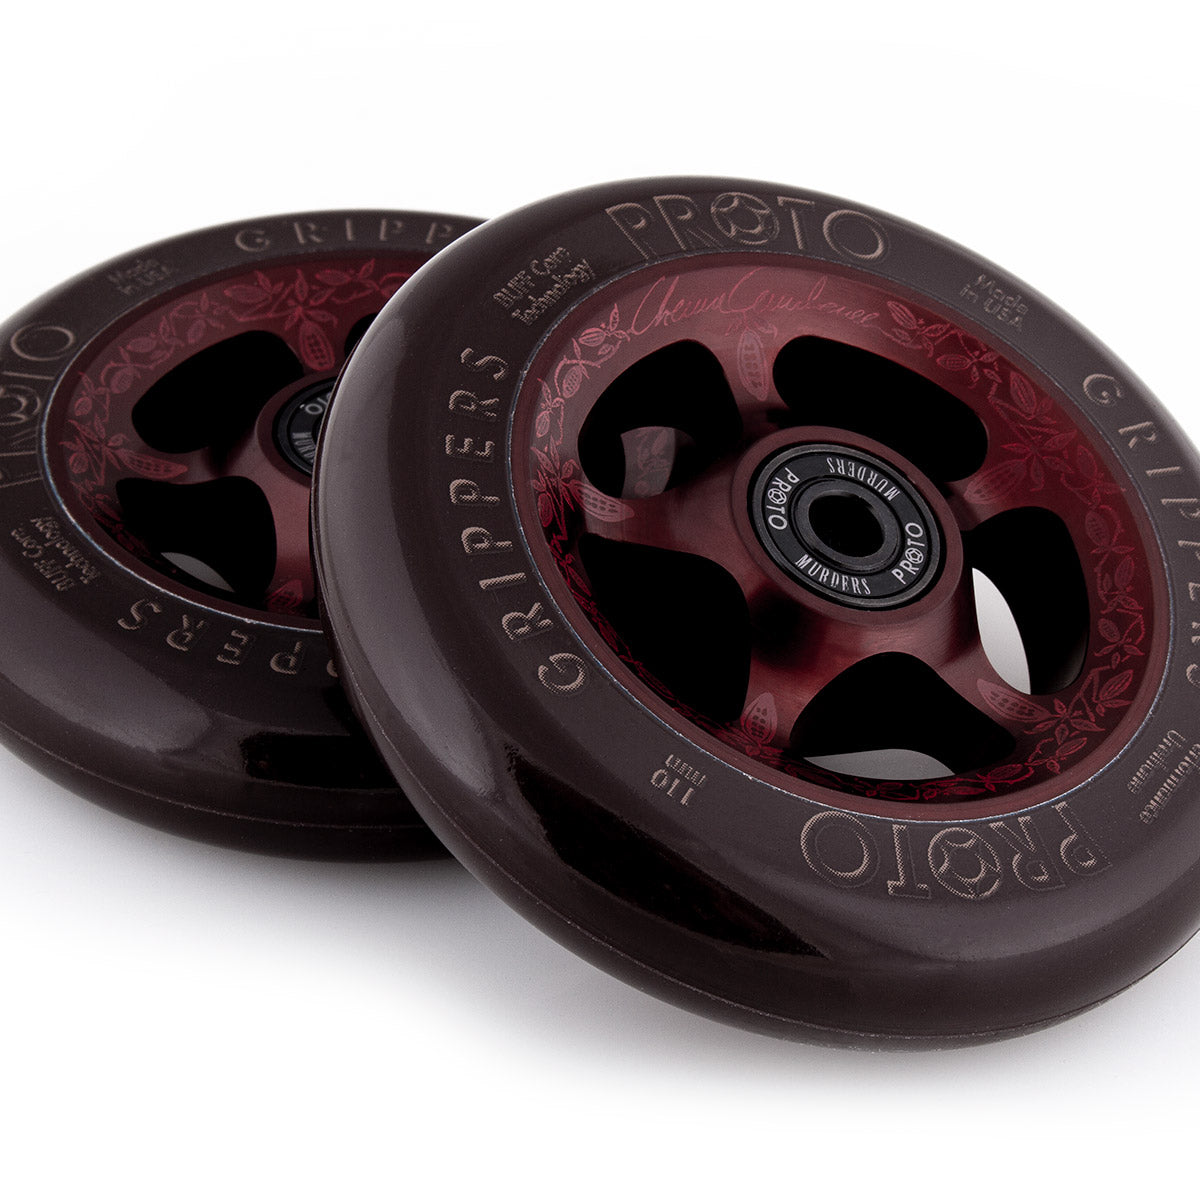 Proto Chocoholic Grippers Chema Cardenas Sig. (PAIR) - Scooter Wheels The pair